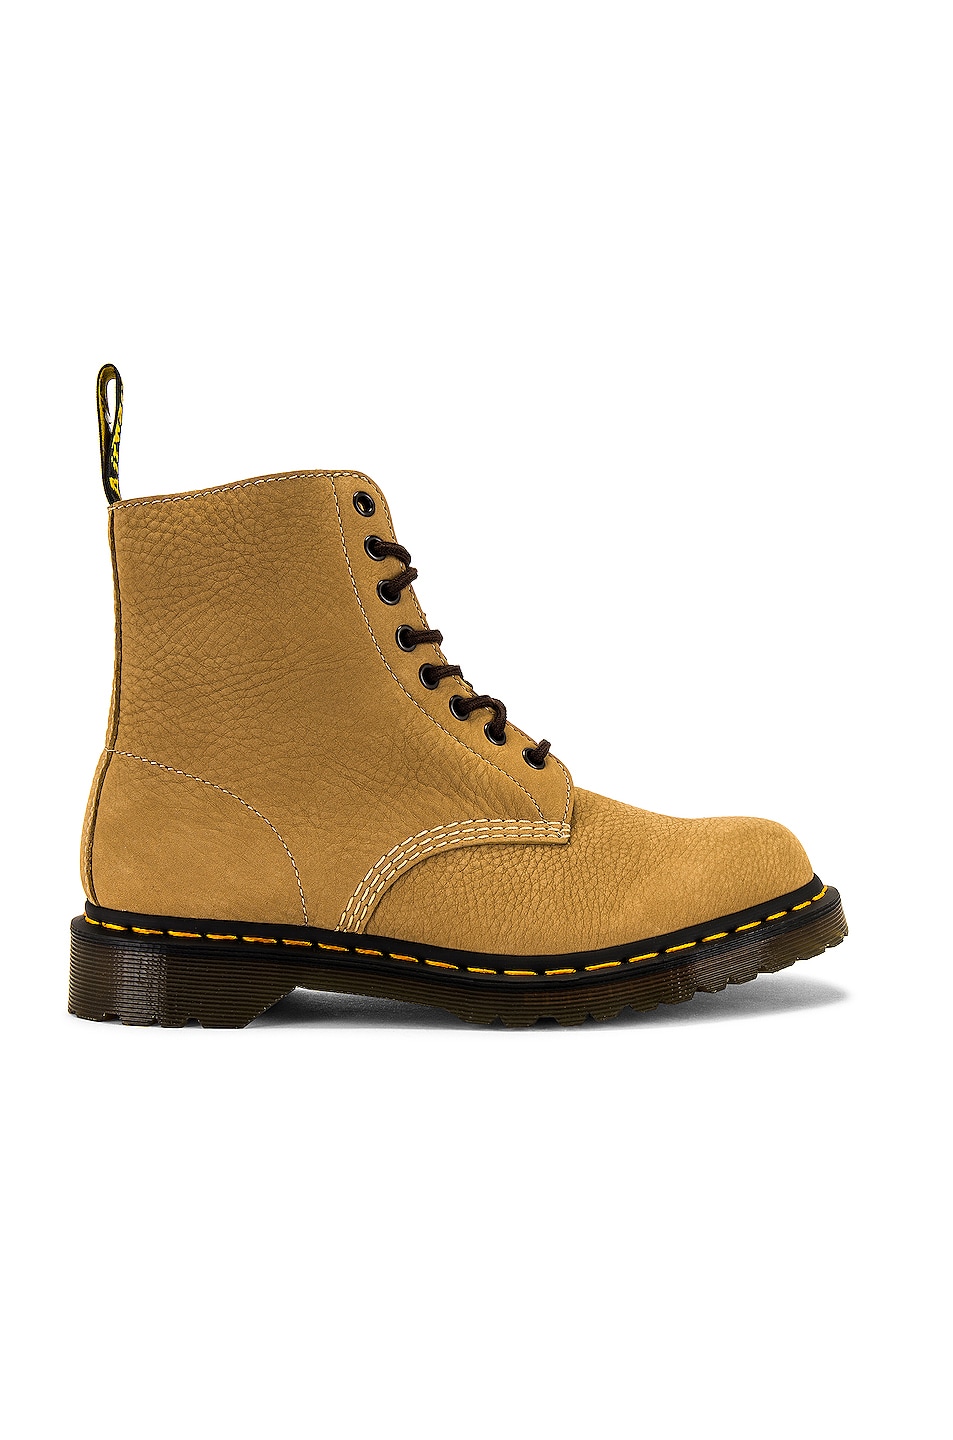 Image 1 of Dr. Martens 1460 Milled Nubuck Boots in Sand